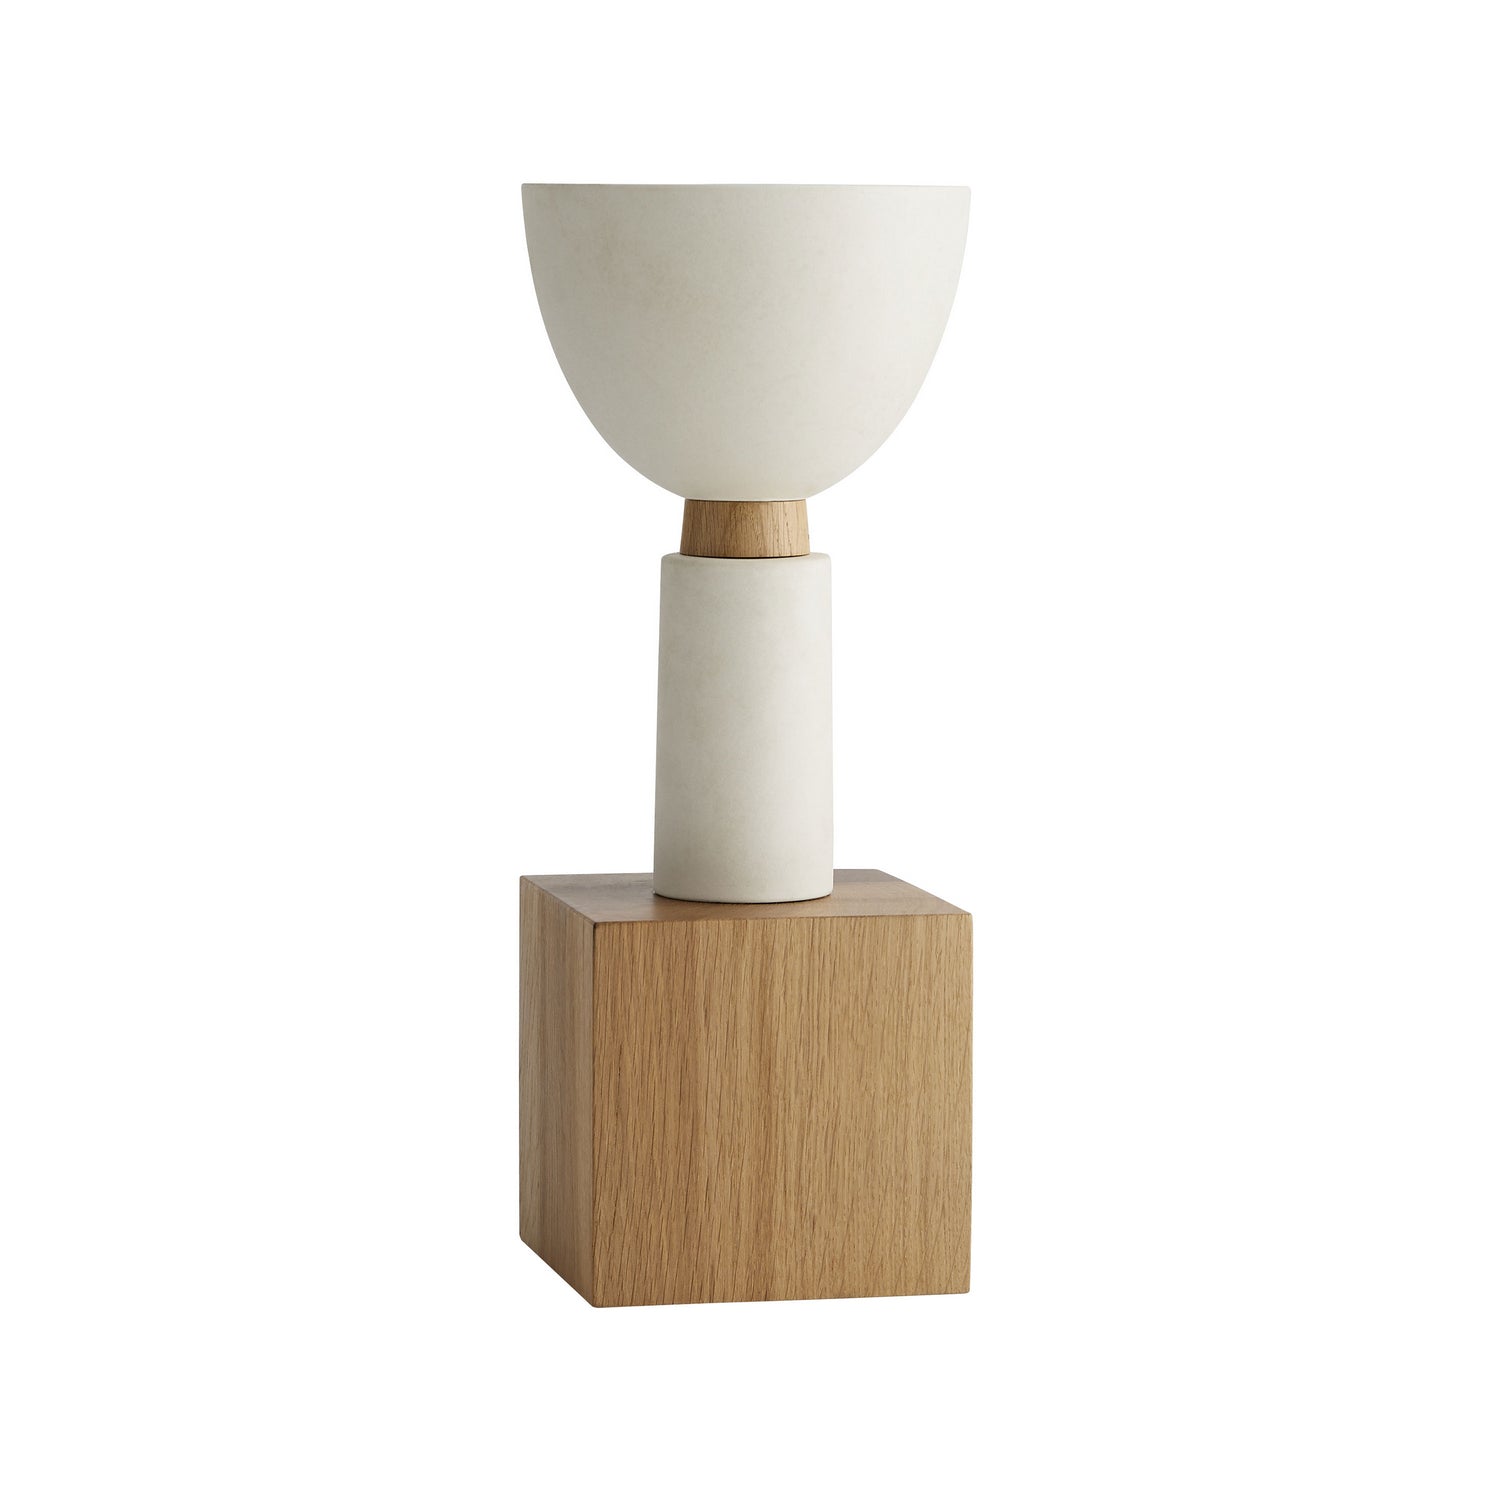 Vase from the Mod collection in Egg Shell finish